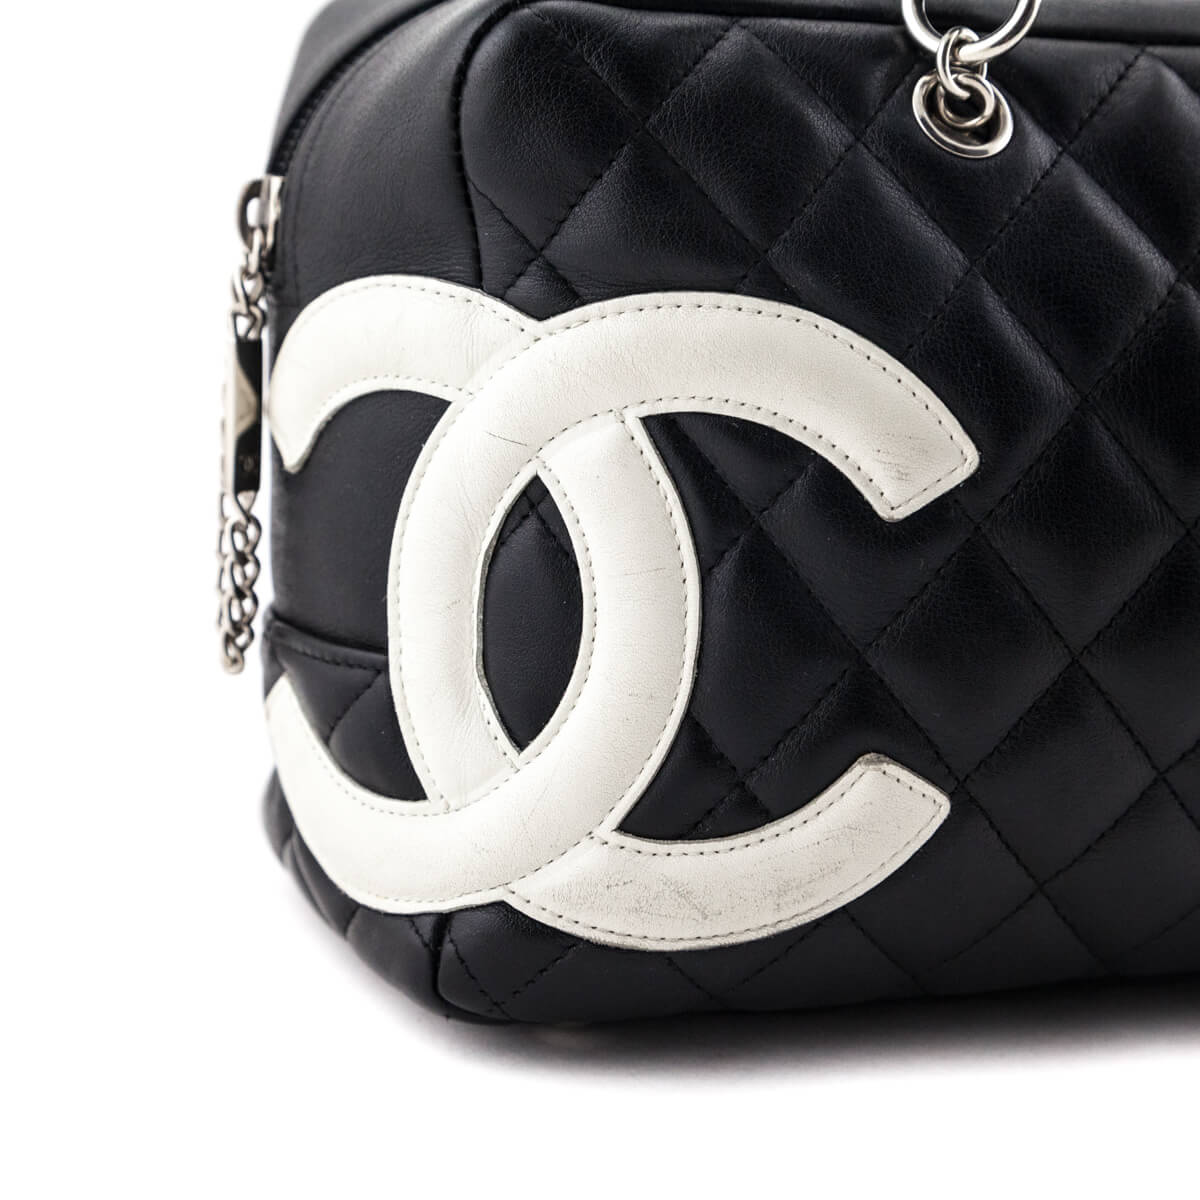 Sold at Auction: Chanel Black Quilted Lambskin Cambon Ligne Bowler Bag